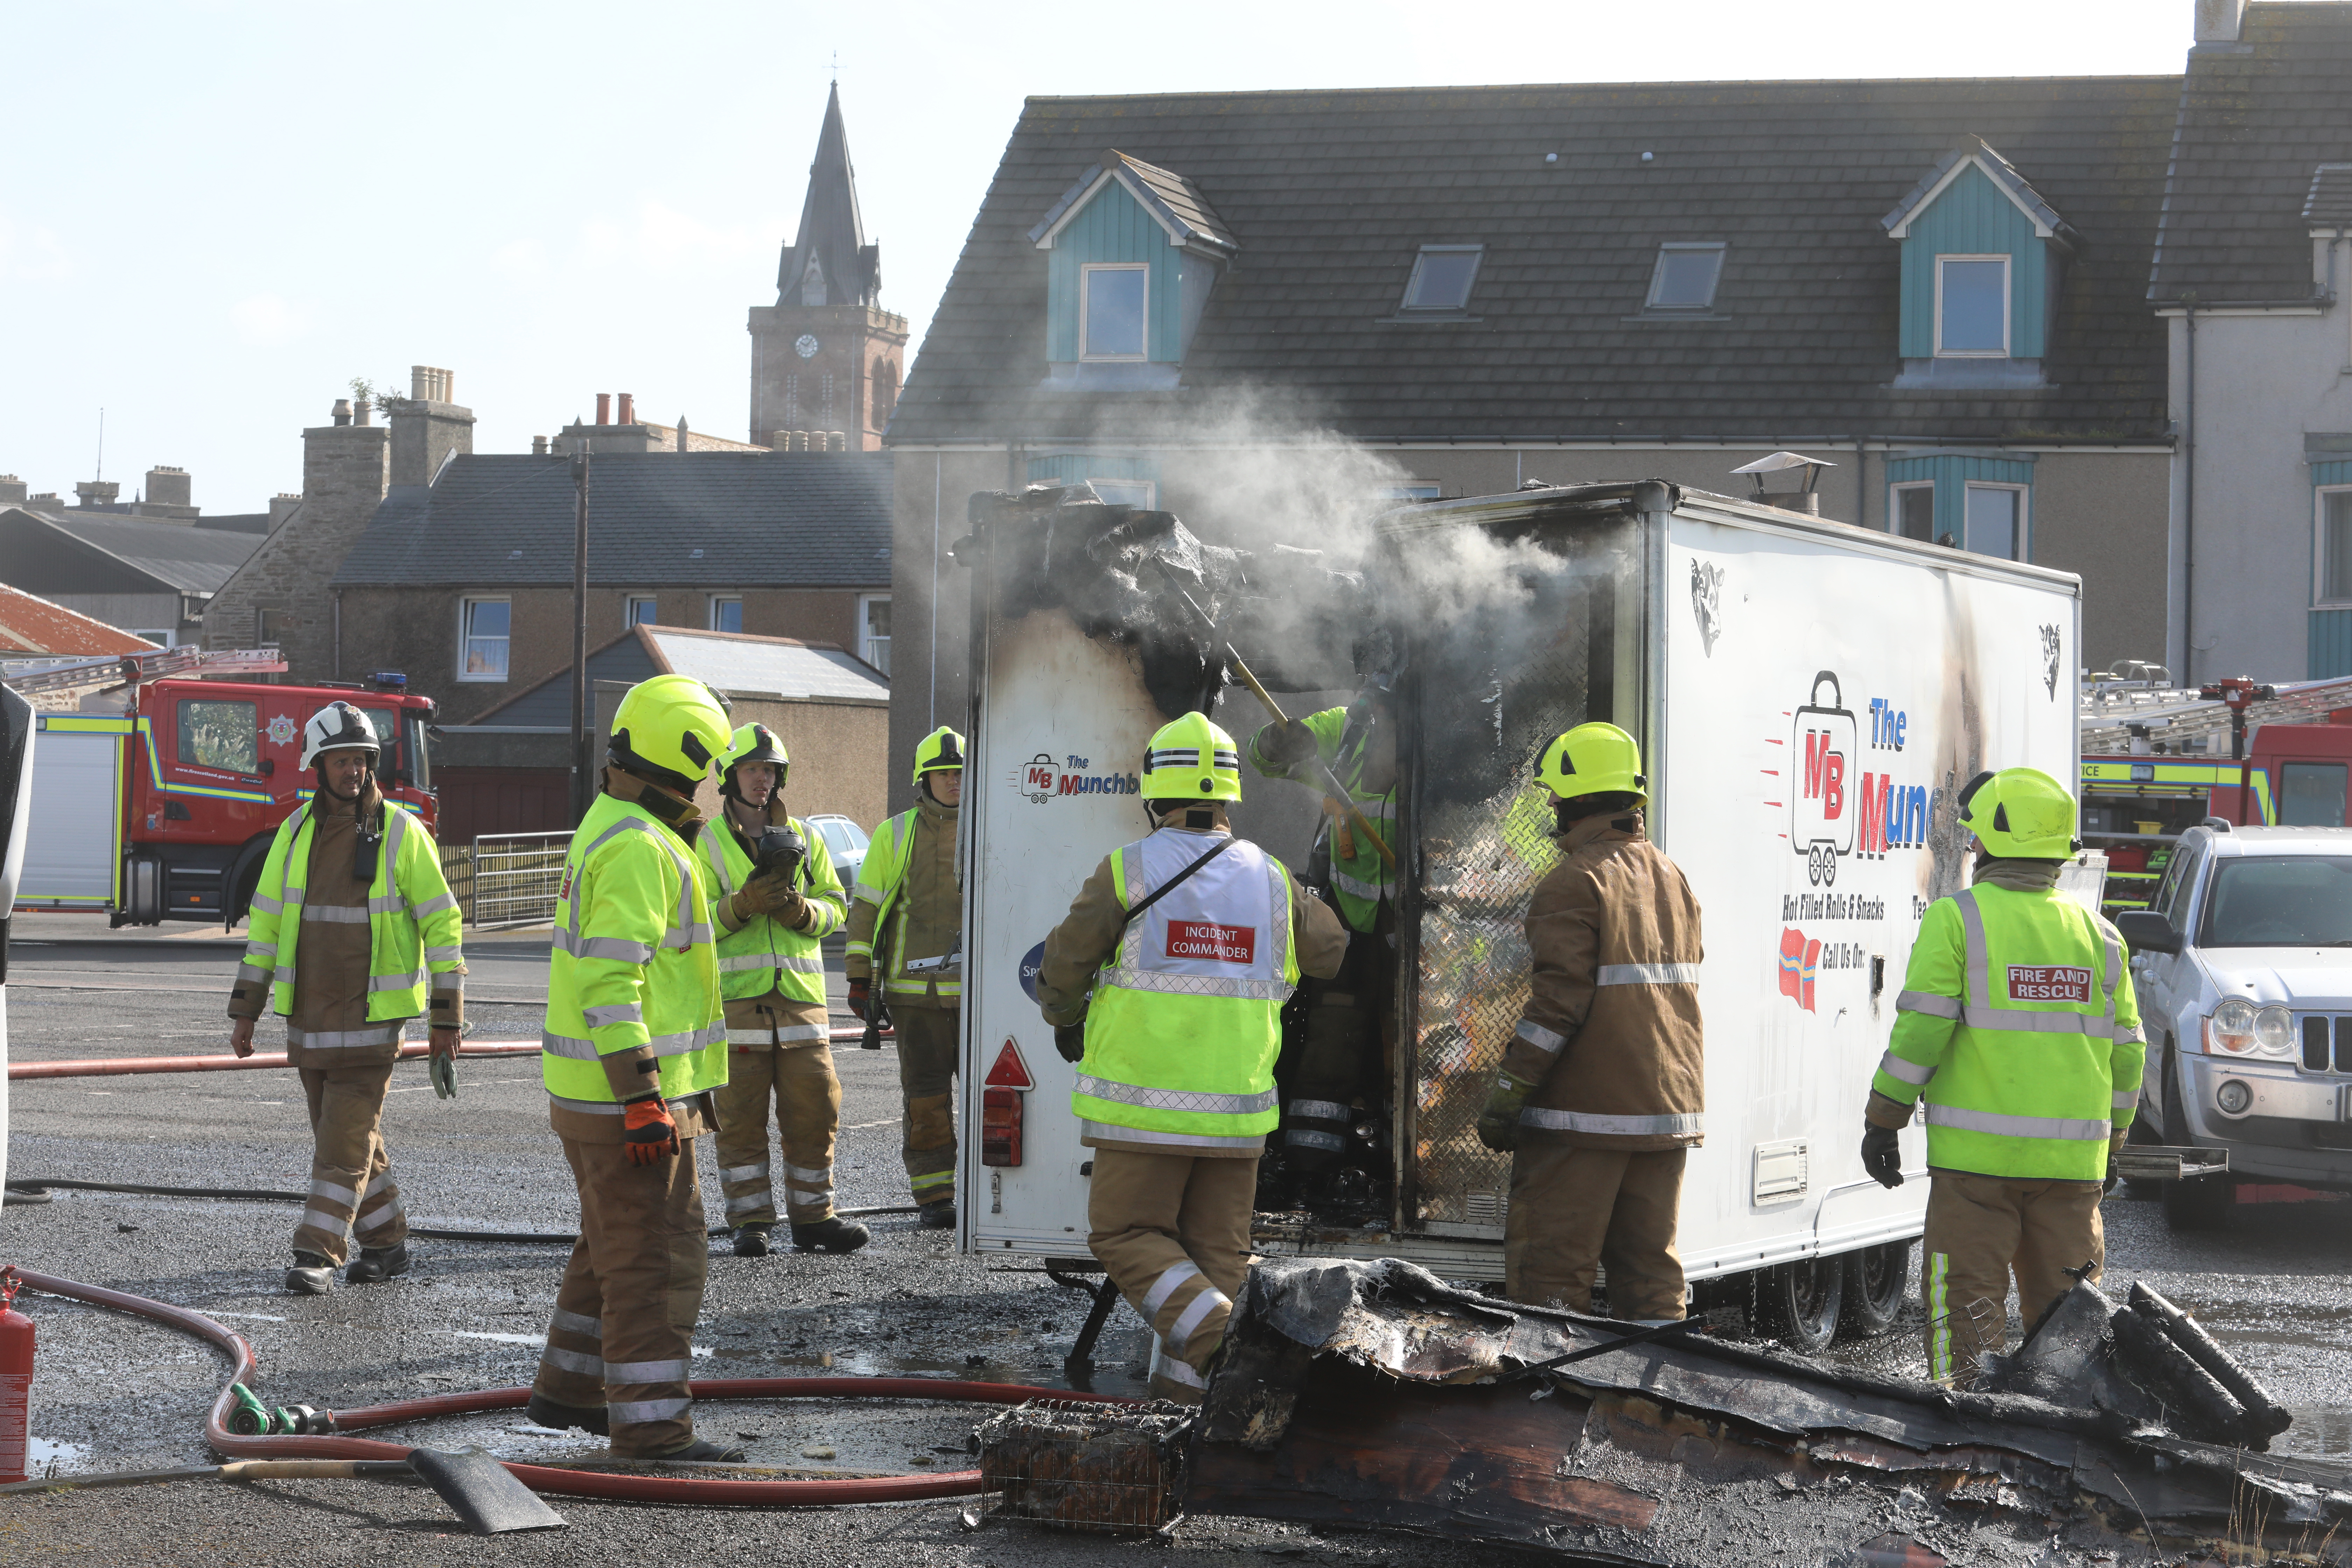 The MunchBox food trailer was completley destroyed in a fire based opposite Lidl's in Kirkwall.